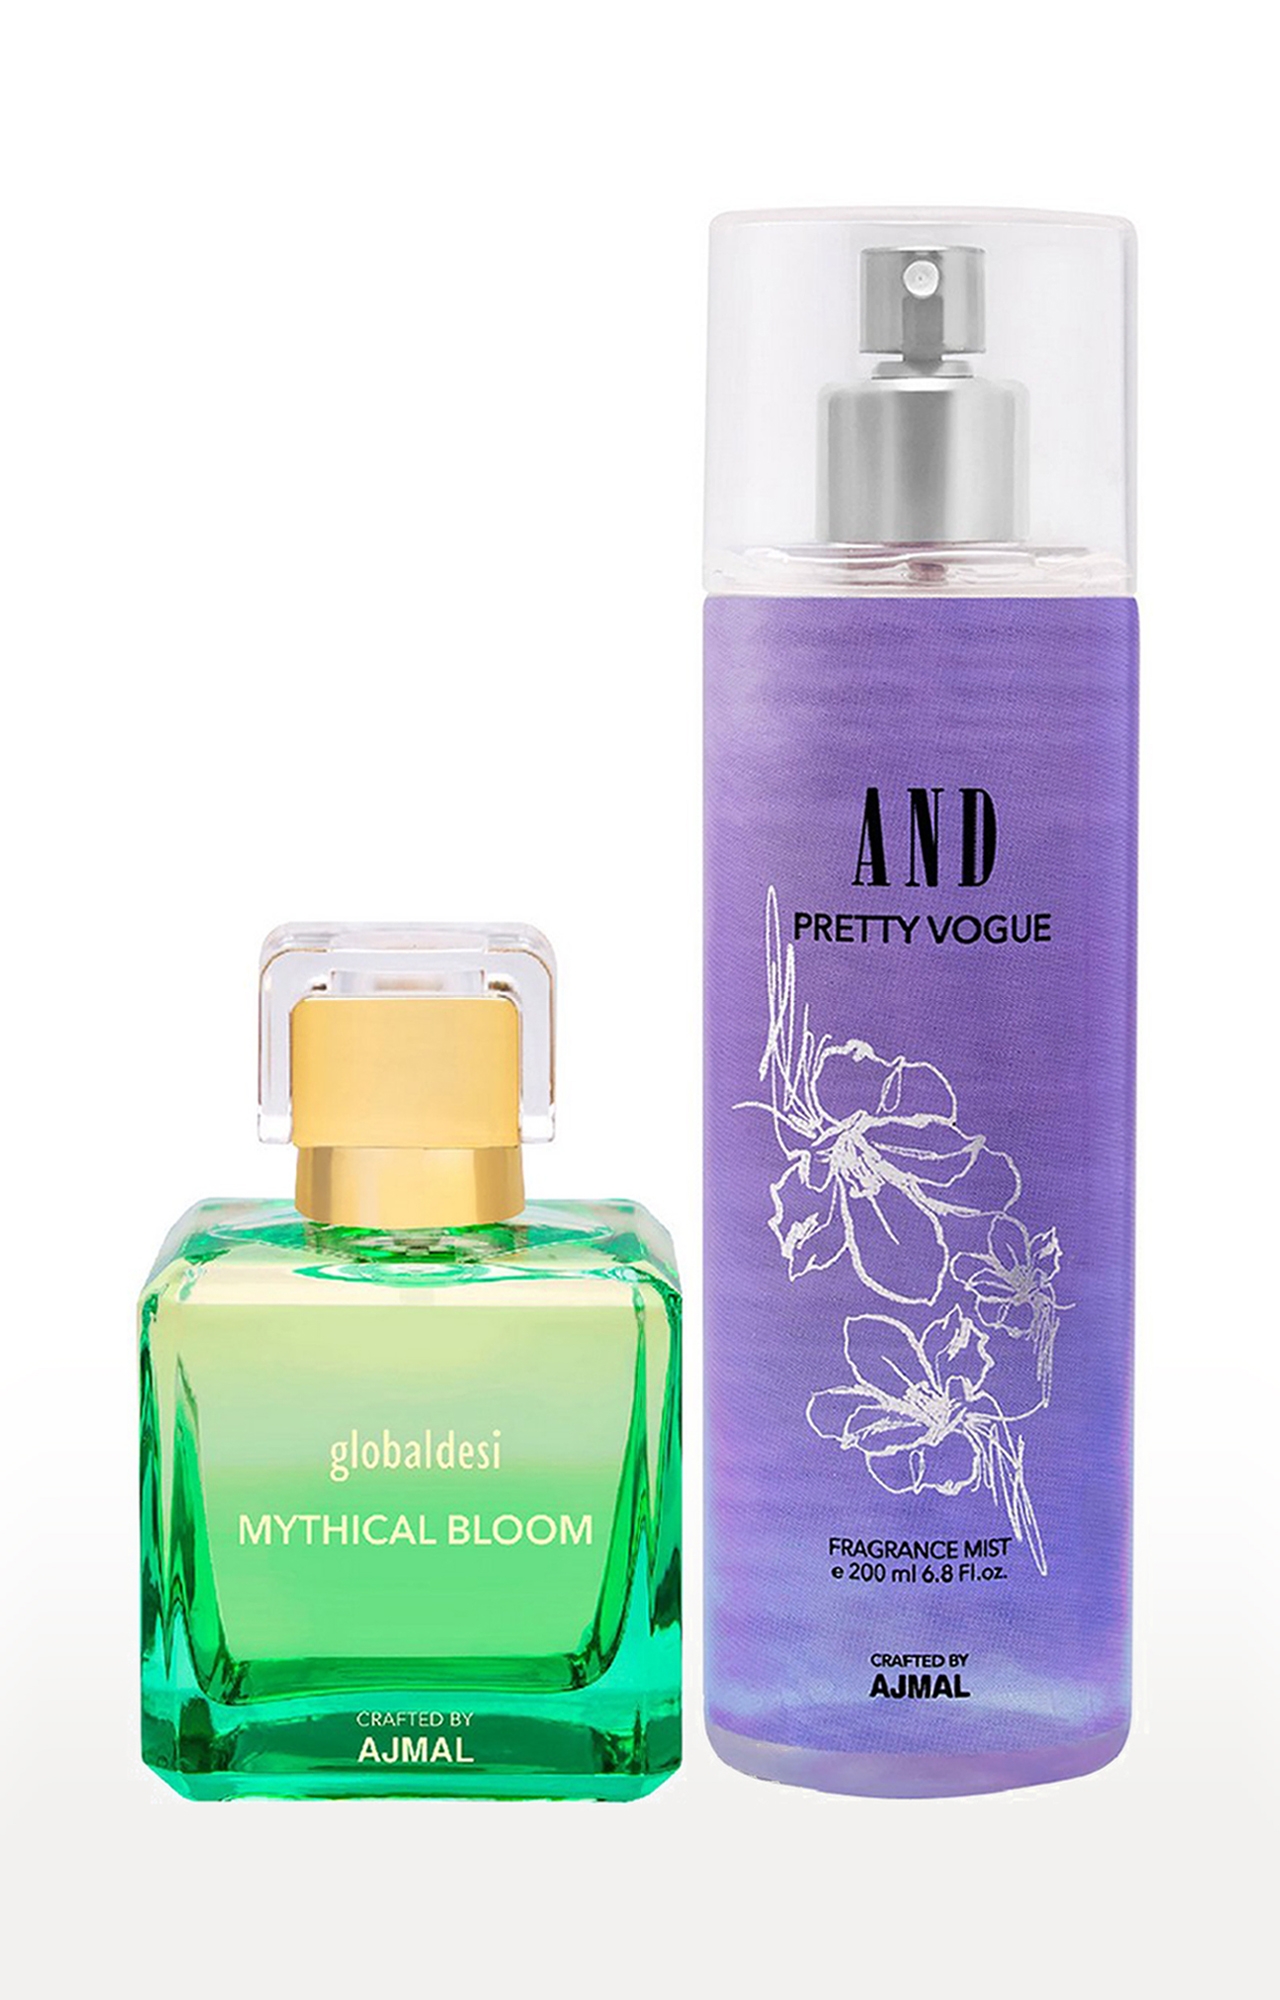 Global Mythical Bloom Trance EDP 100ML & AND Pretty Vogue Body Mist 200ML 